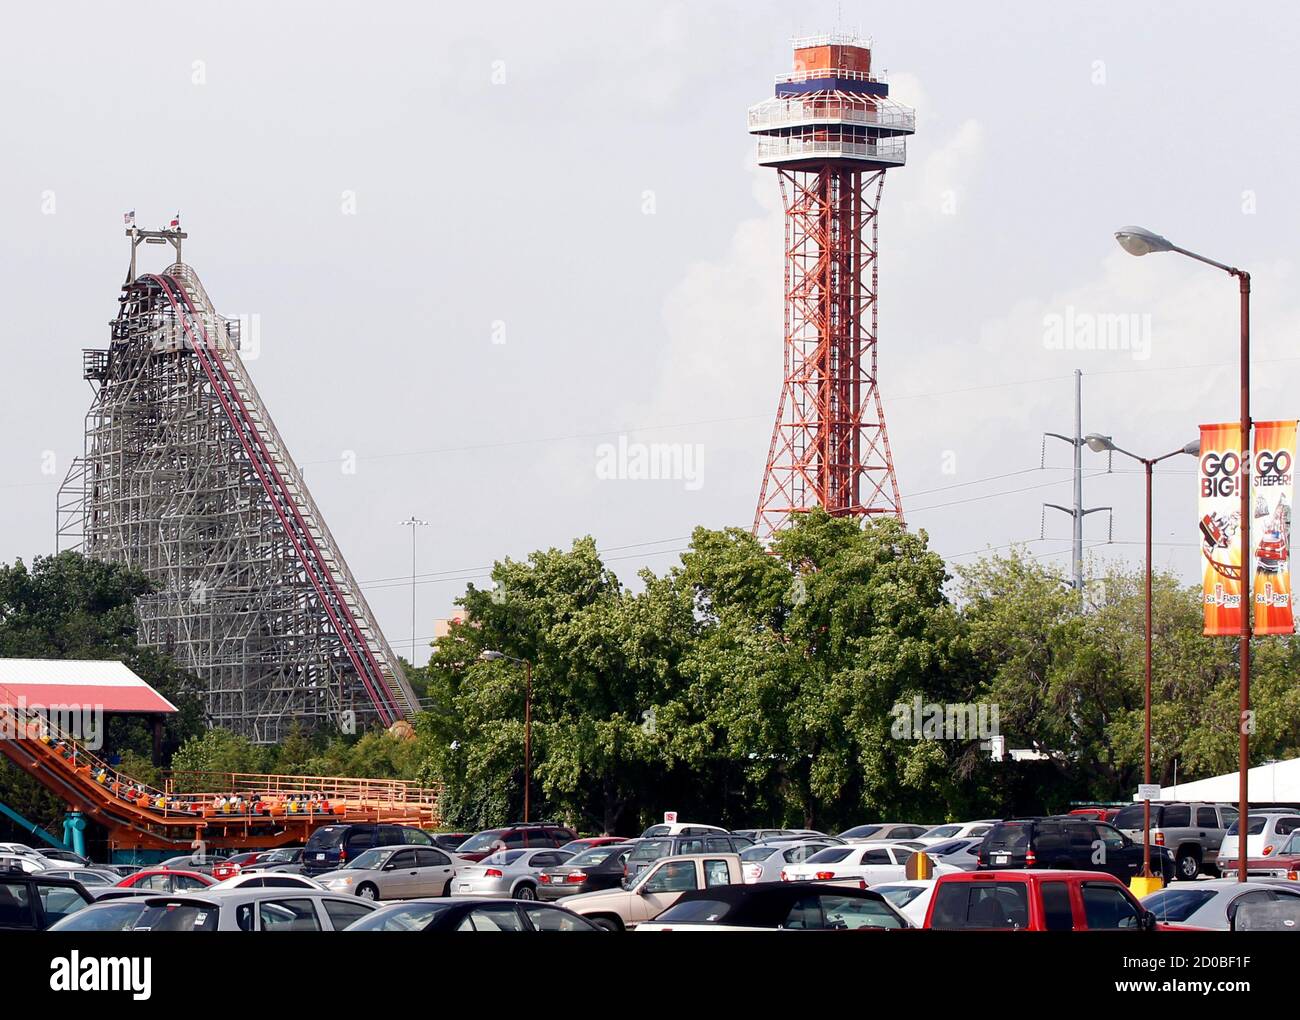 The Texas Giant roller coaster ride (L) is seen at the Six Flags Over Texas amusement park in Arlington, Texas July 23, 2013.  A woman who plunged from the Texas Giant roller coaster ride at the Six Flags Over Texas amusement park died of multiple traumatic injuries in a fall that was ruled an accident, authorities said on Monday.  REUTERS/Mike Stone (UNITED STATES - Tags: SOCIETY) Stock Photo